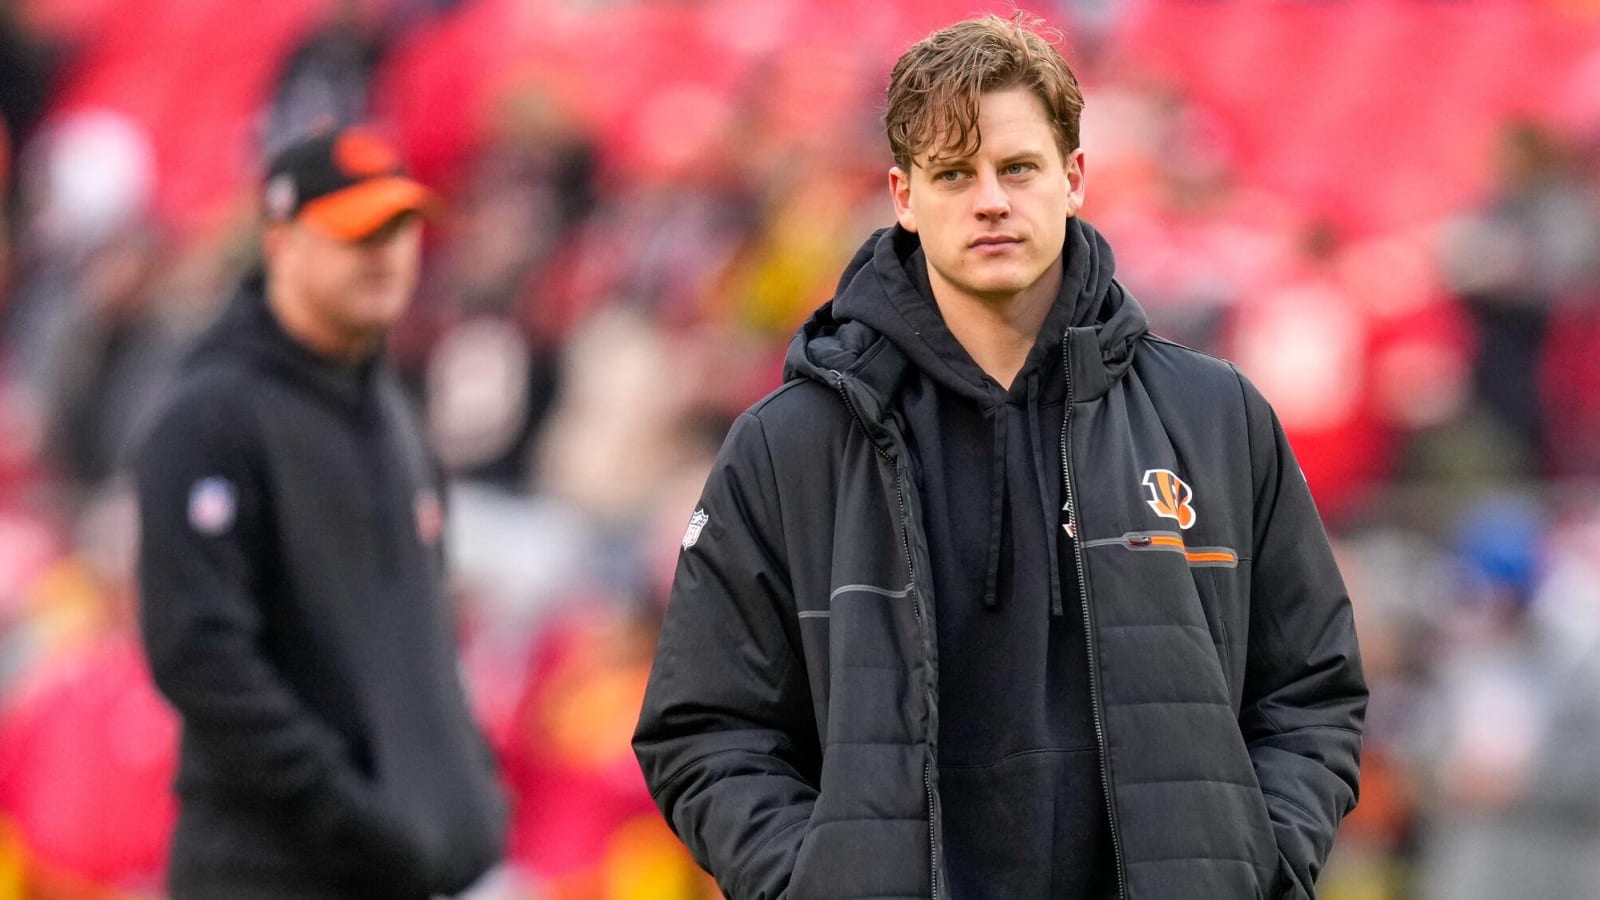 Bengals show QB Joe Burrow throwing for first time this offseason following wrist surgery